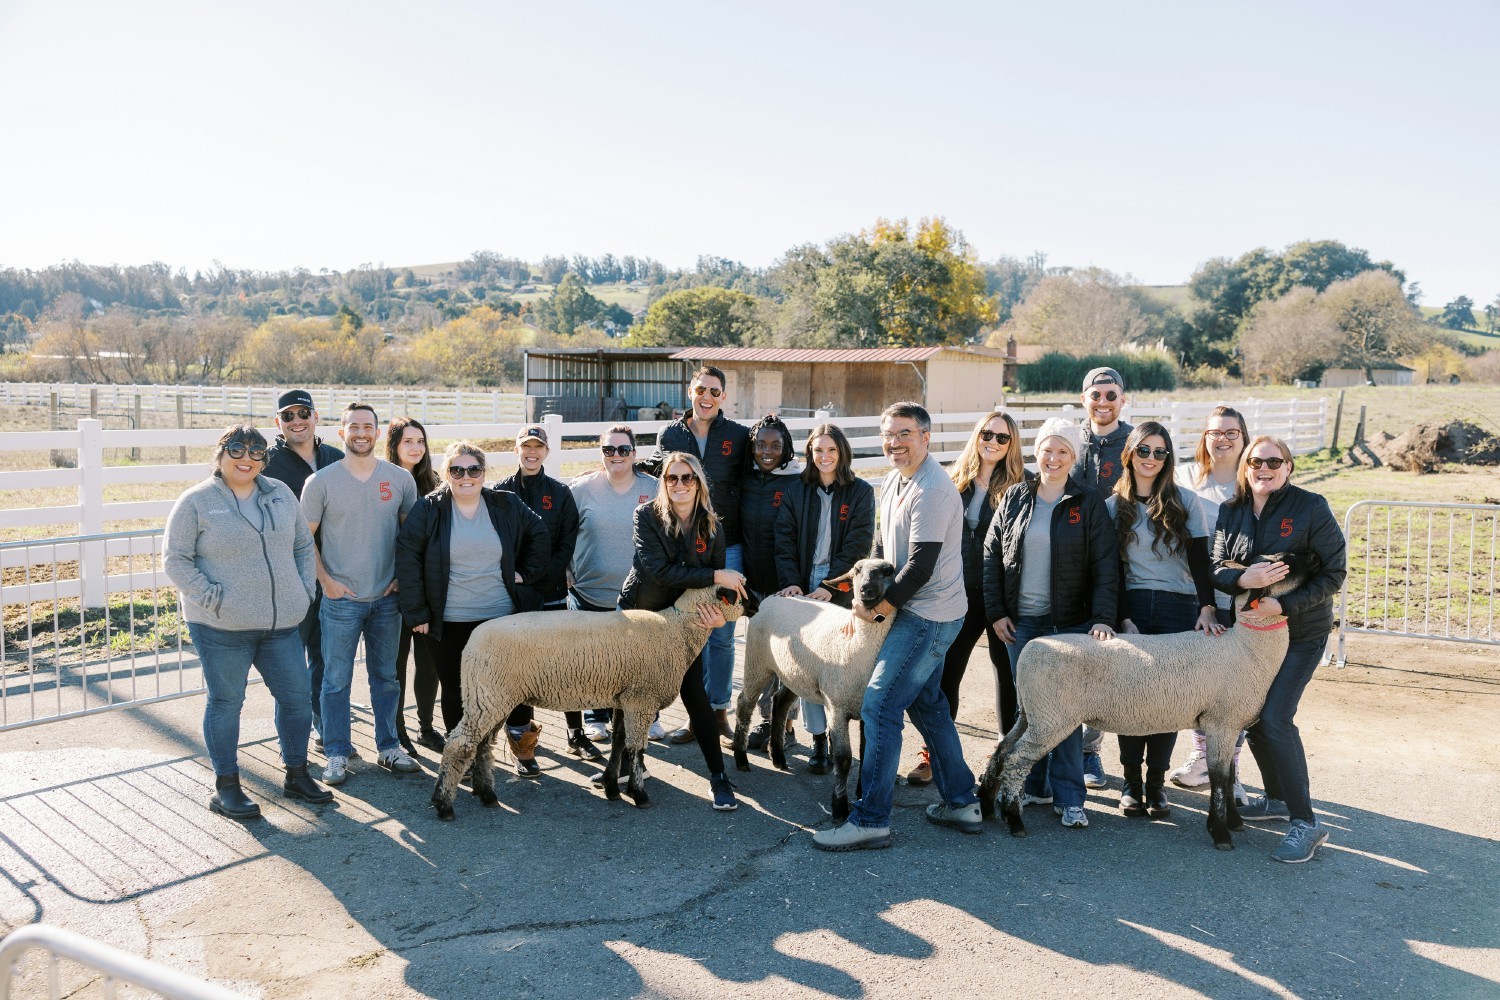 Studio 5 engaged in their iconic sheep immersion leadership development experience in San Francisco.